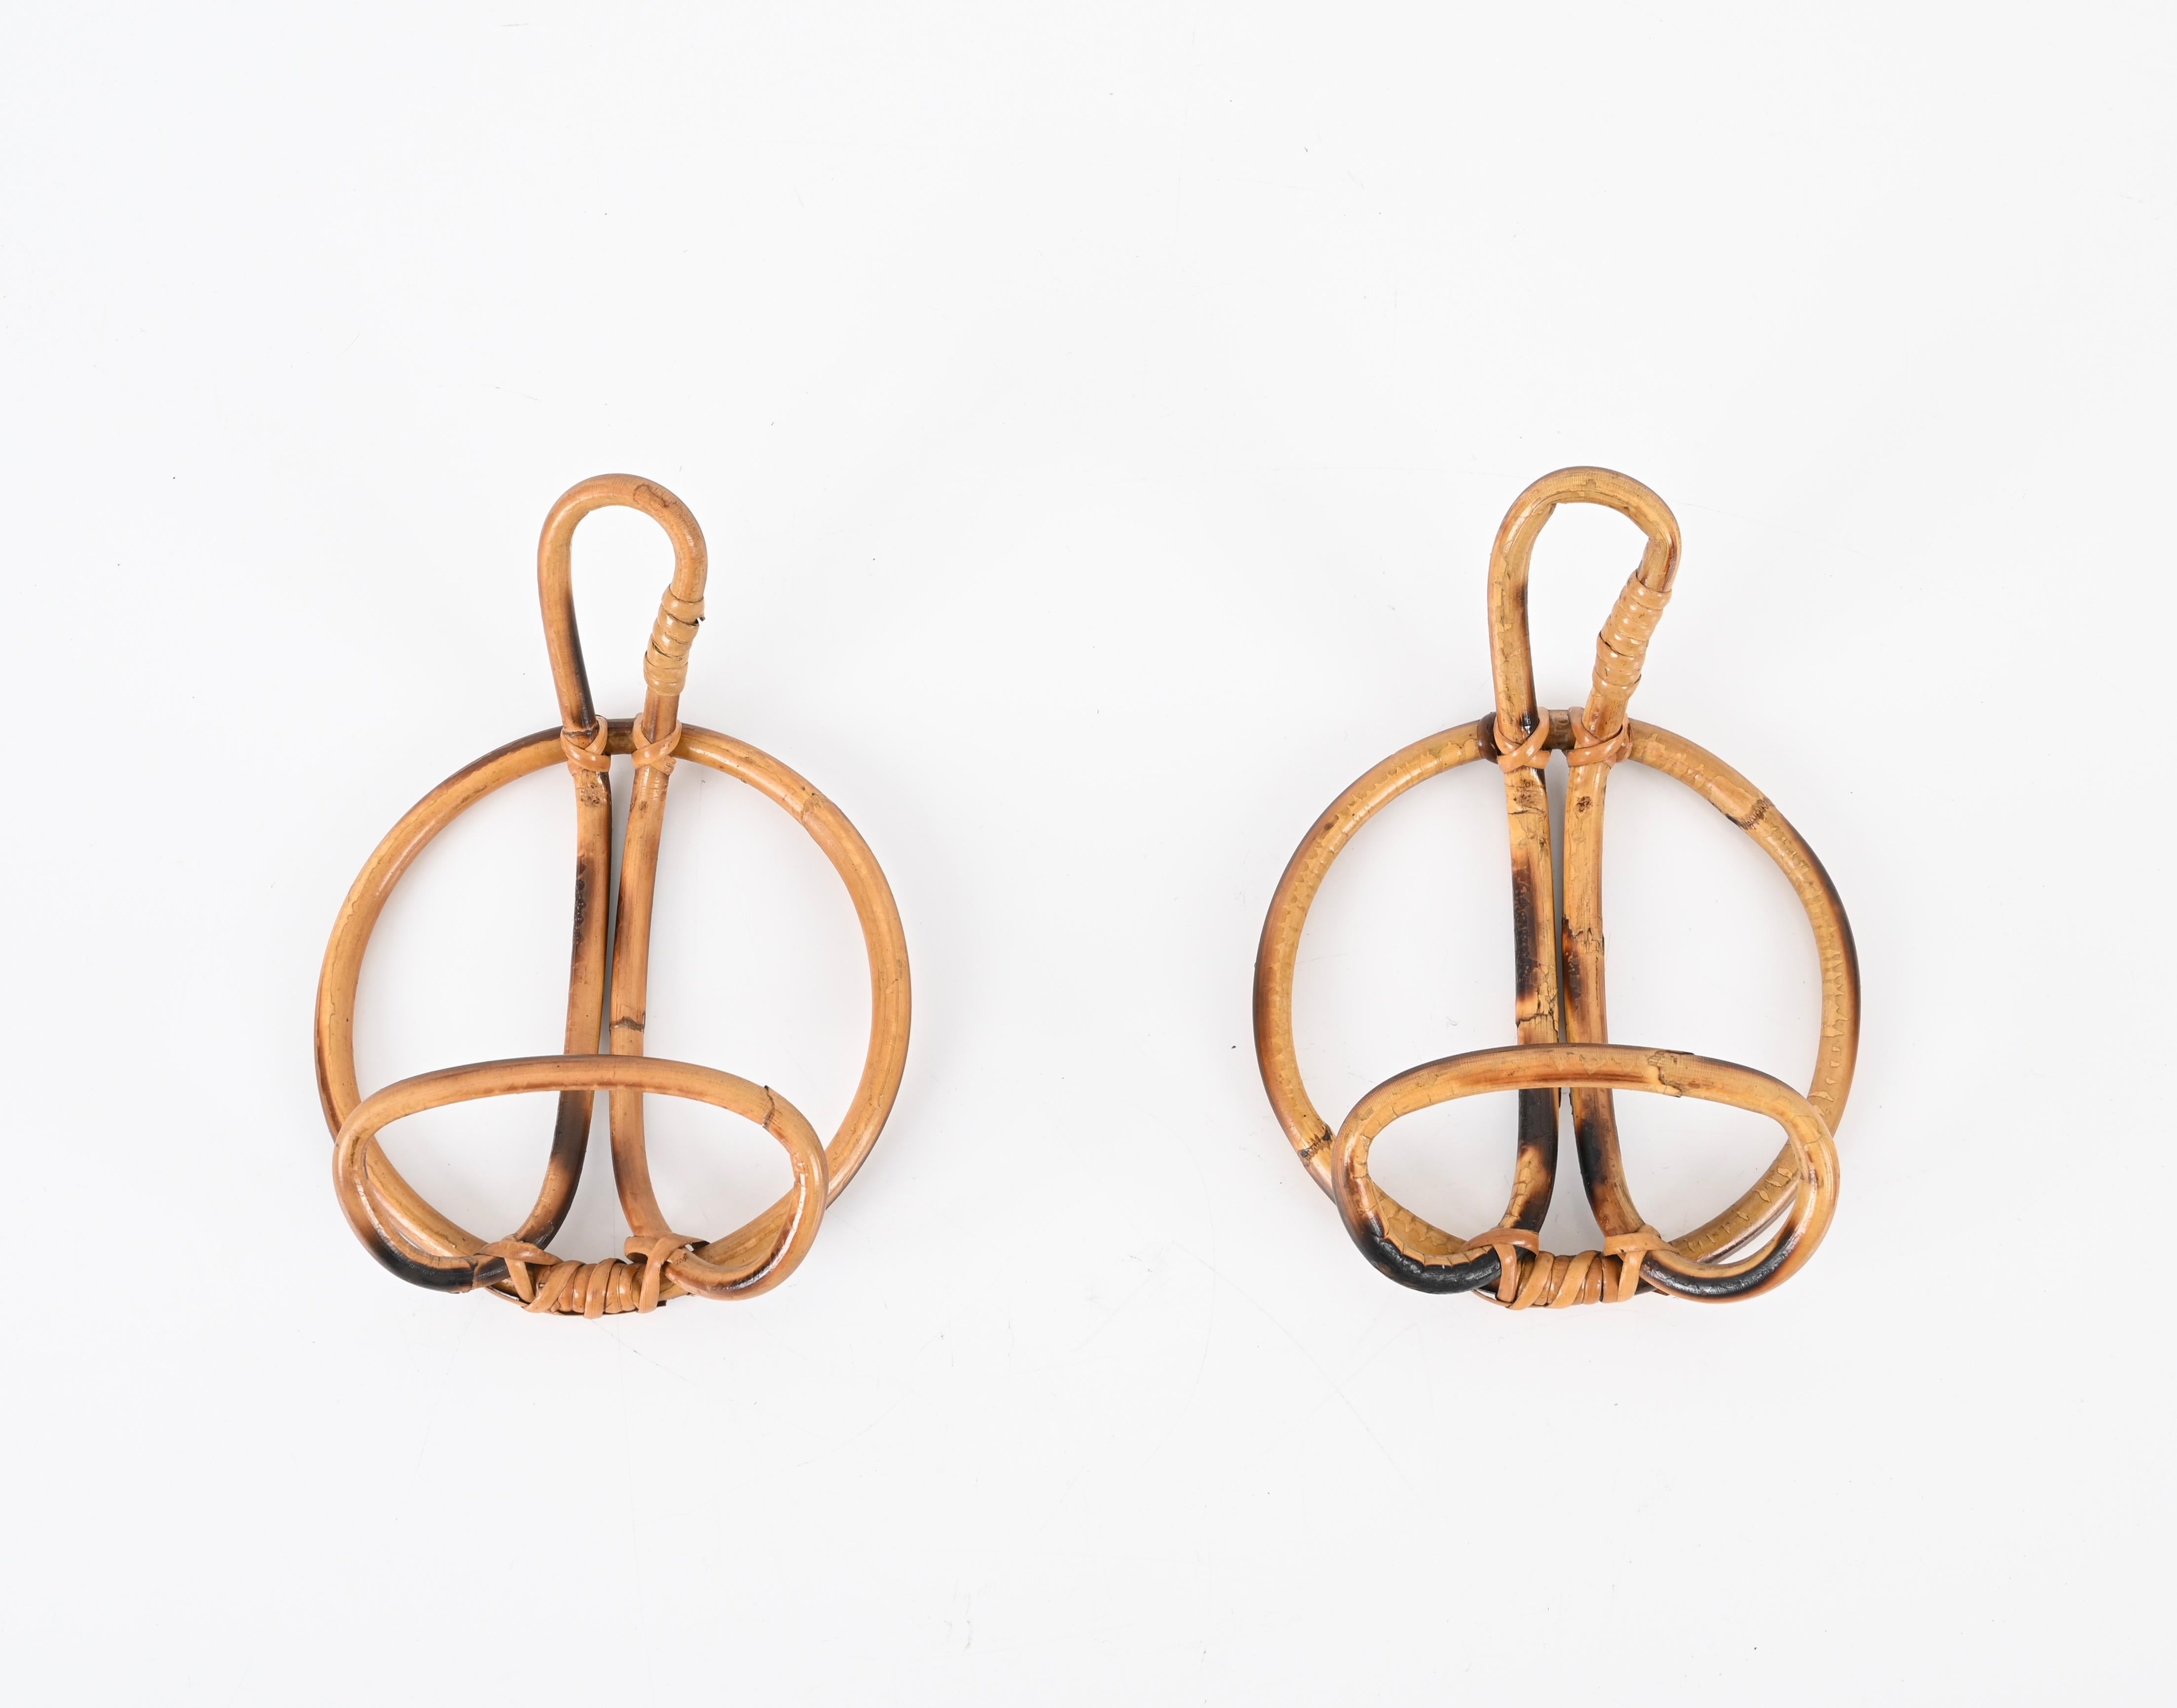 Bamboo Set of Two French Riviera Round Coat Hooks in Rattan and Wicker, Italy 1960s